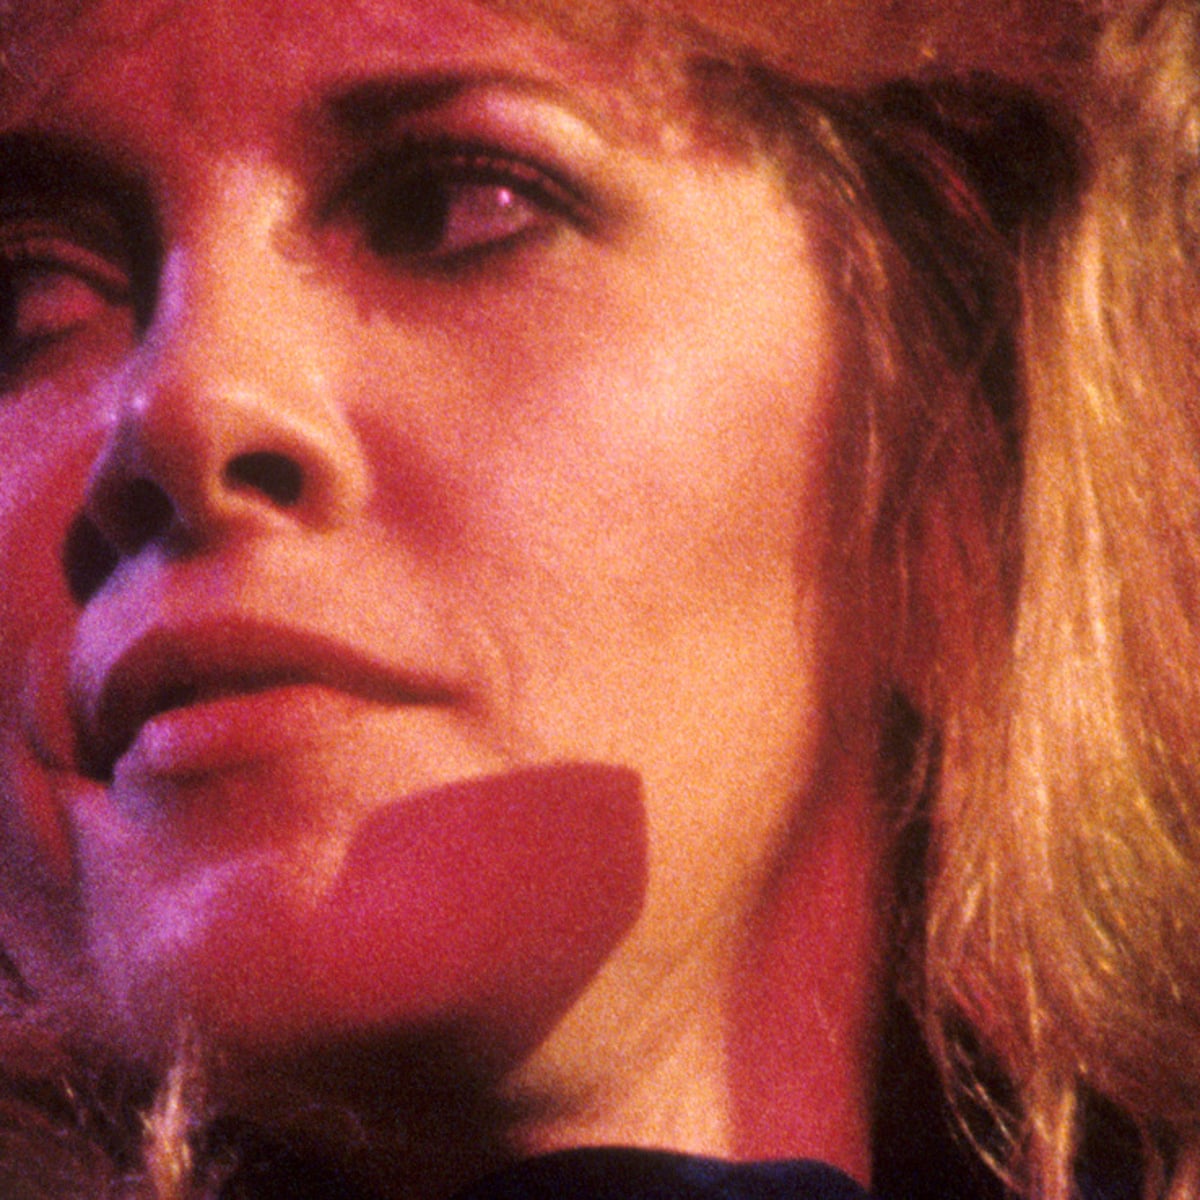 IV. The Impact of Stevie Nicks' Solo Career on the Music Industry